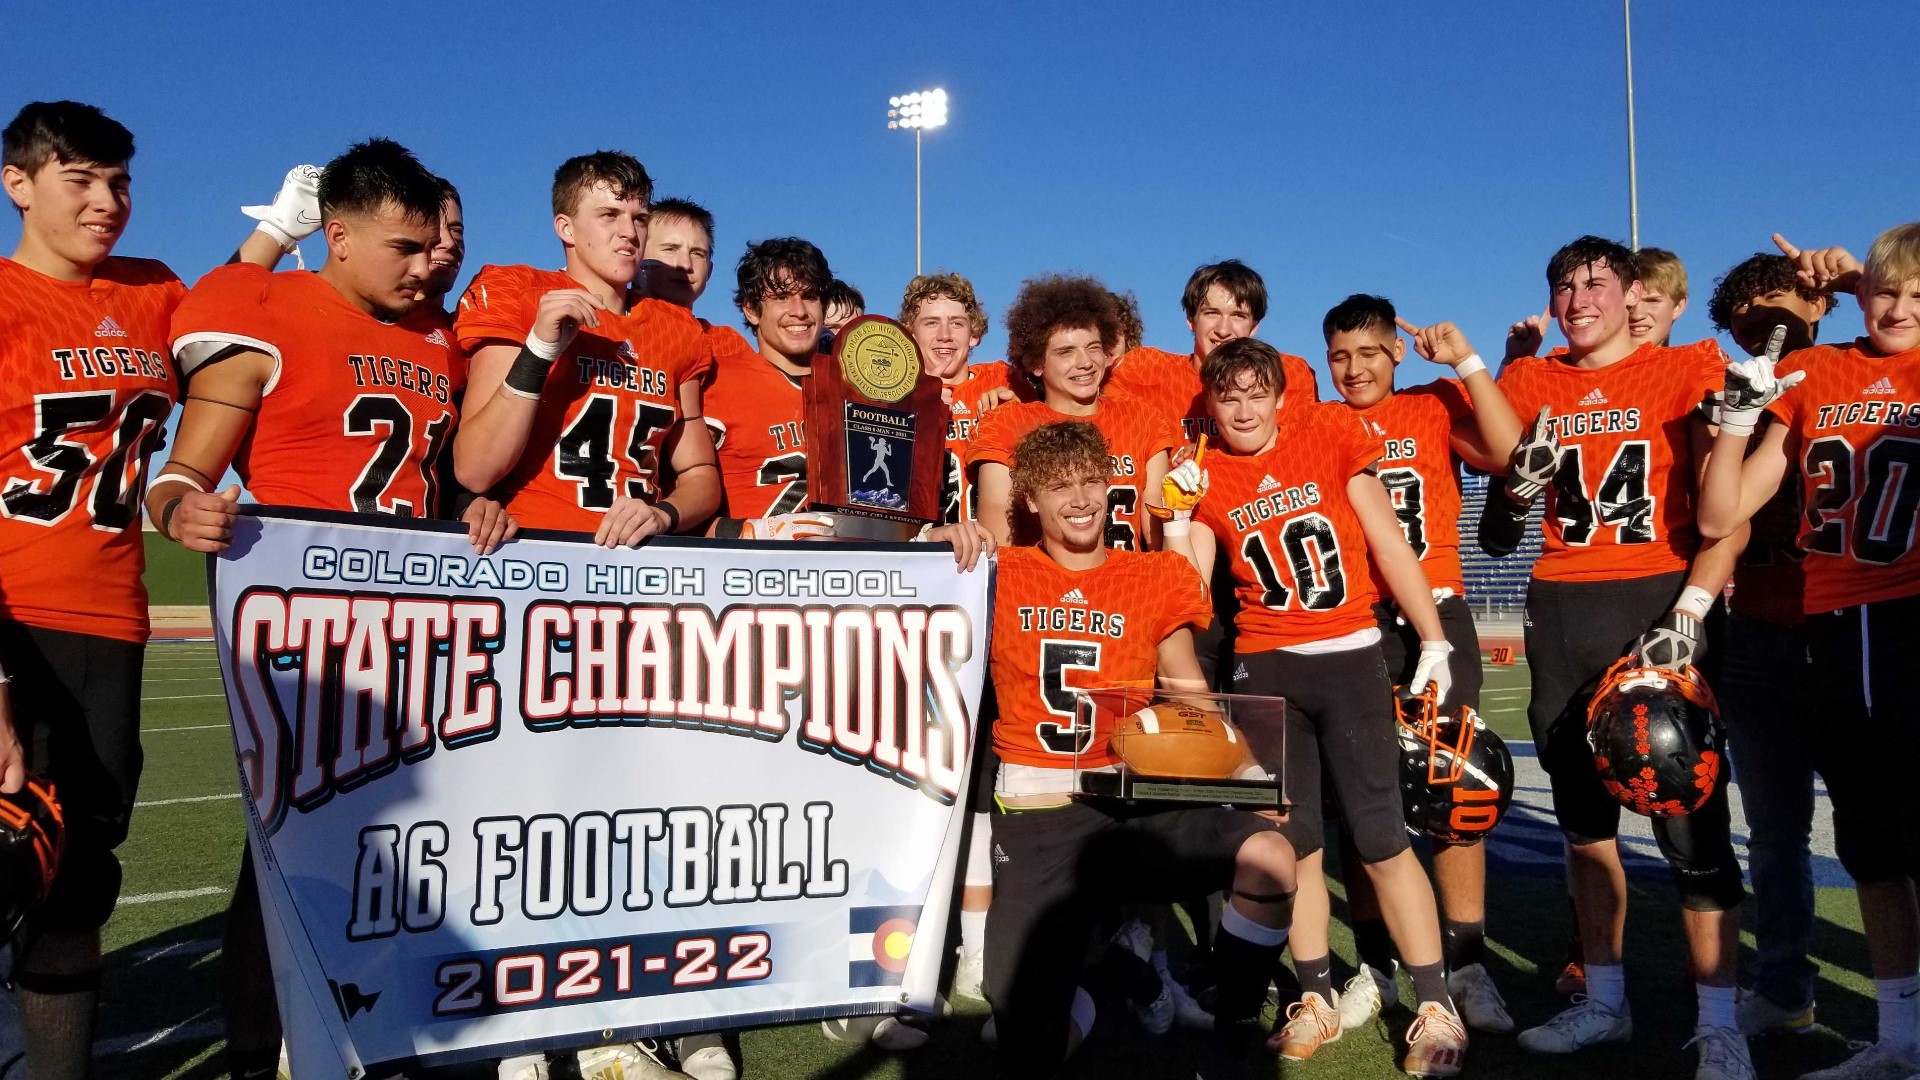 The Tigers completed their perfect season with a 62-21 win over Stratton in the state title game.